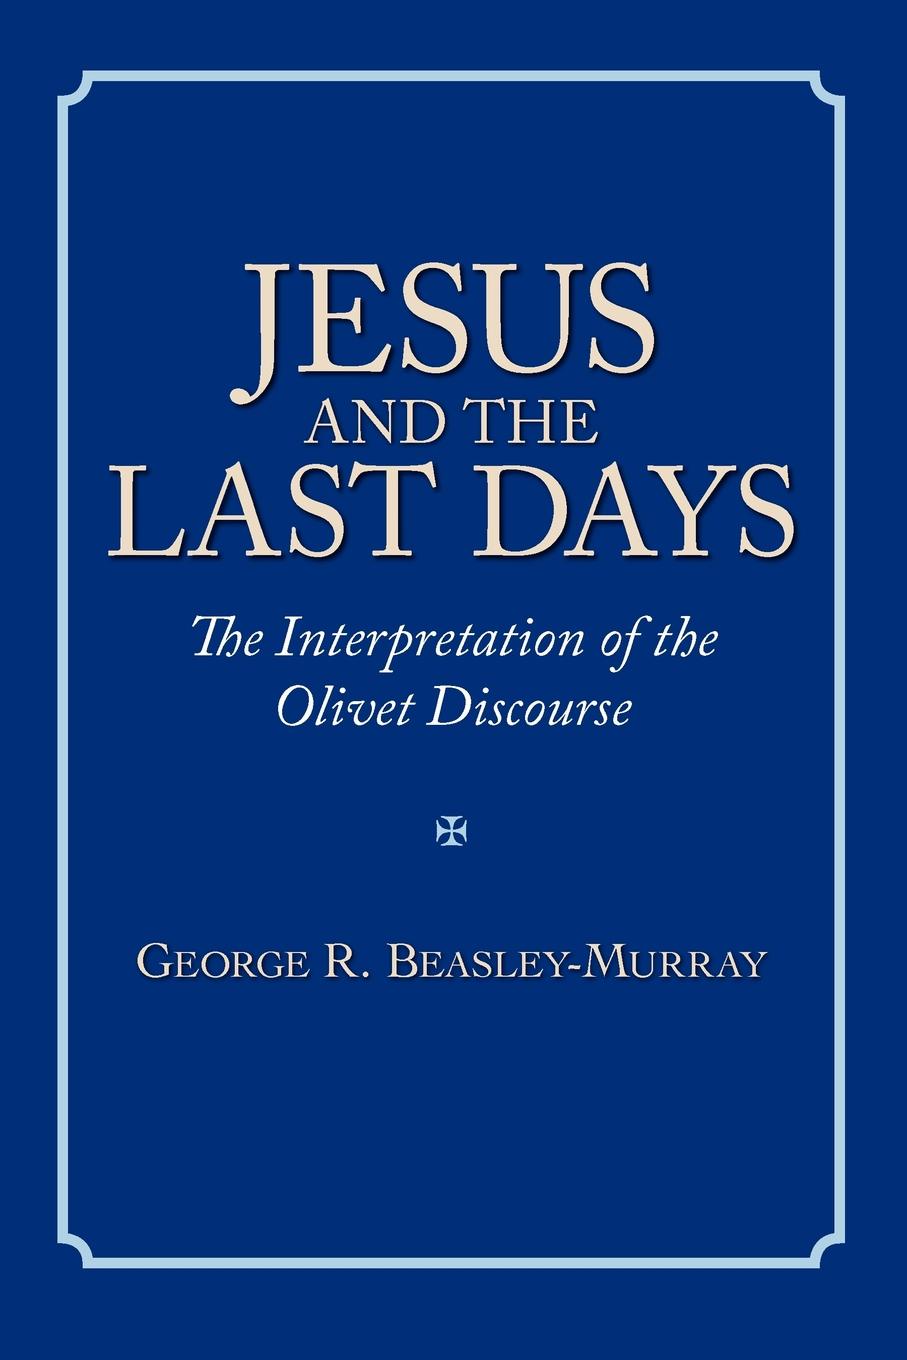 Jesus and the Last Days. The Interpretation of the Olivet Discourse